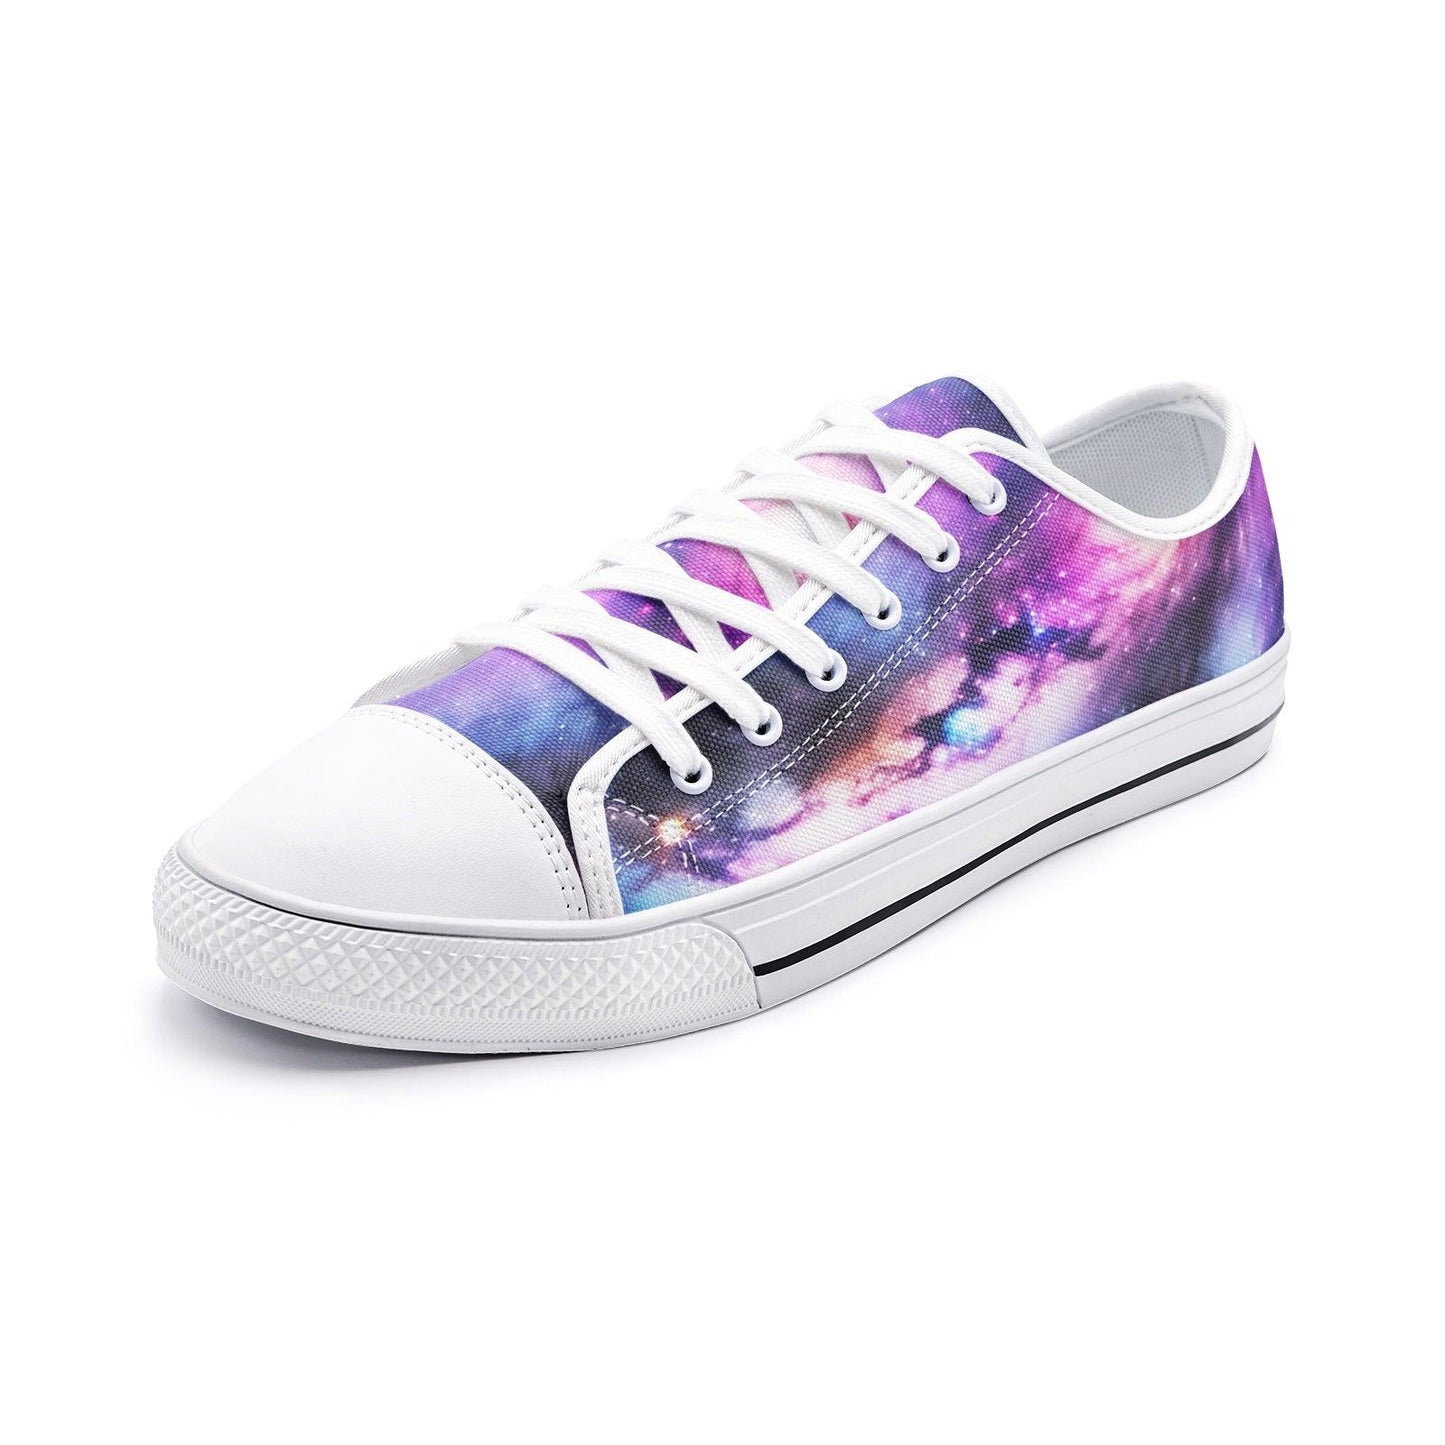 Galaxy Art - Freaky Shoes®